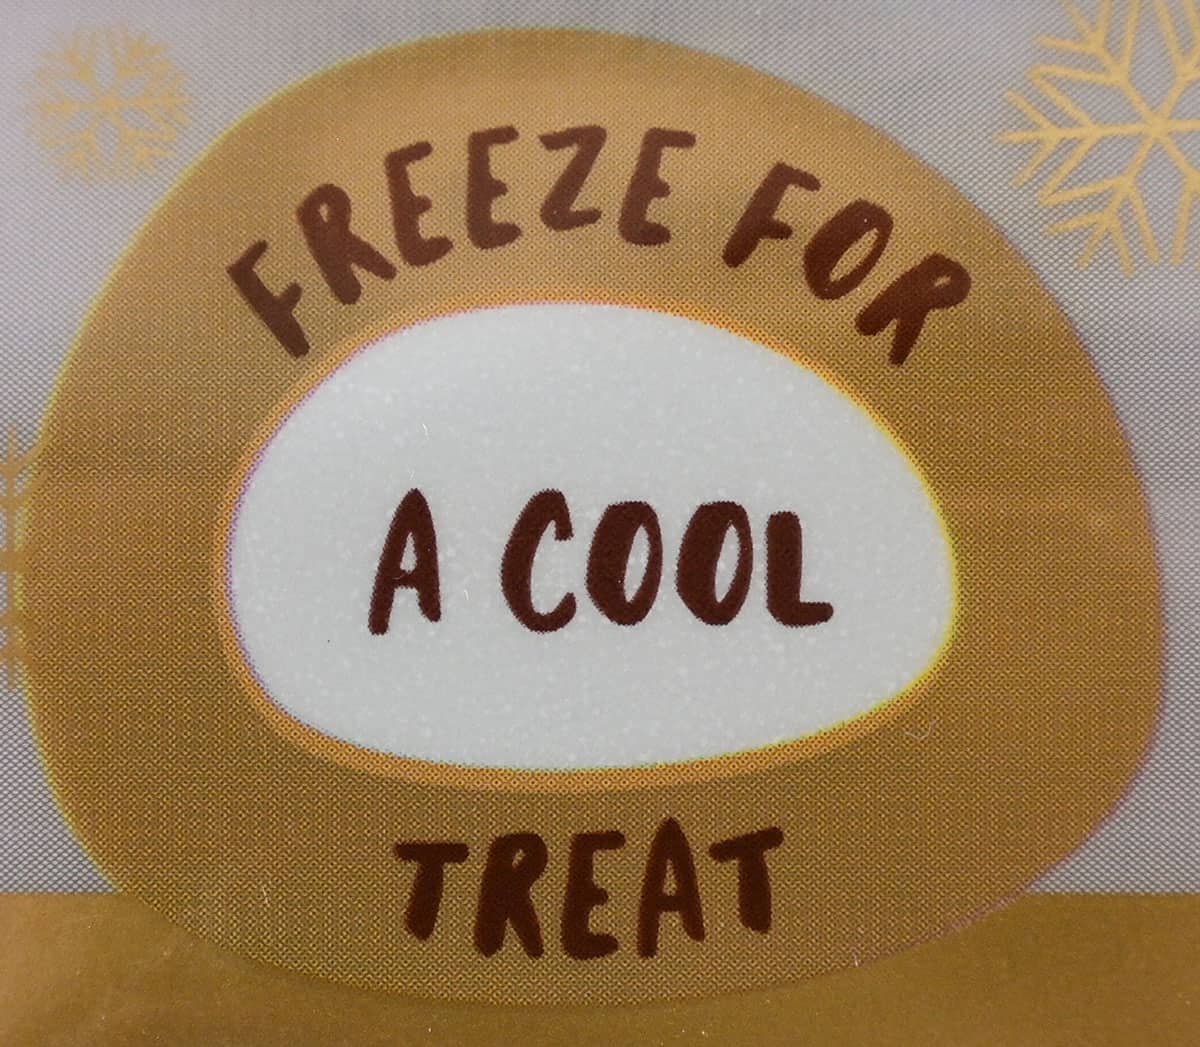 Image of the bag stating you can freeze the mochi for a cool treat.